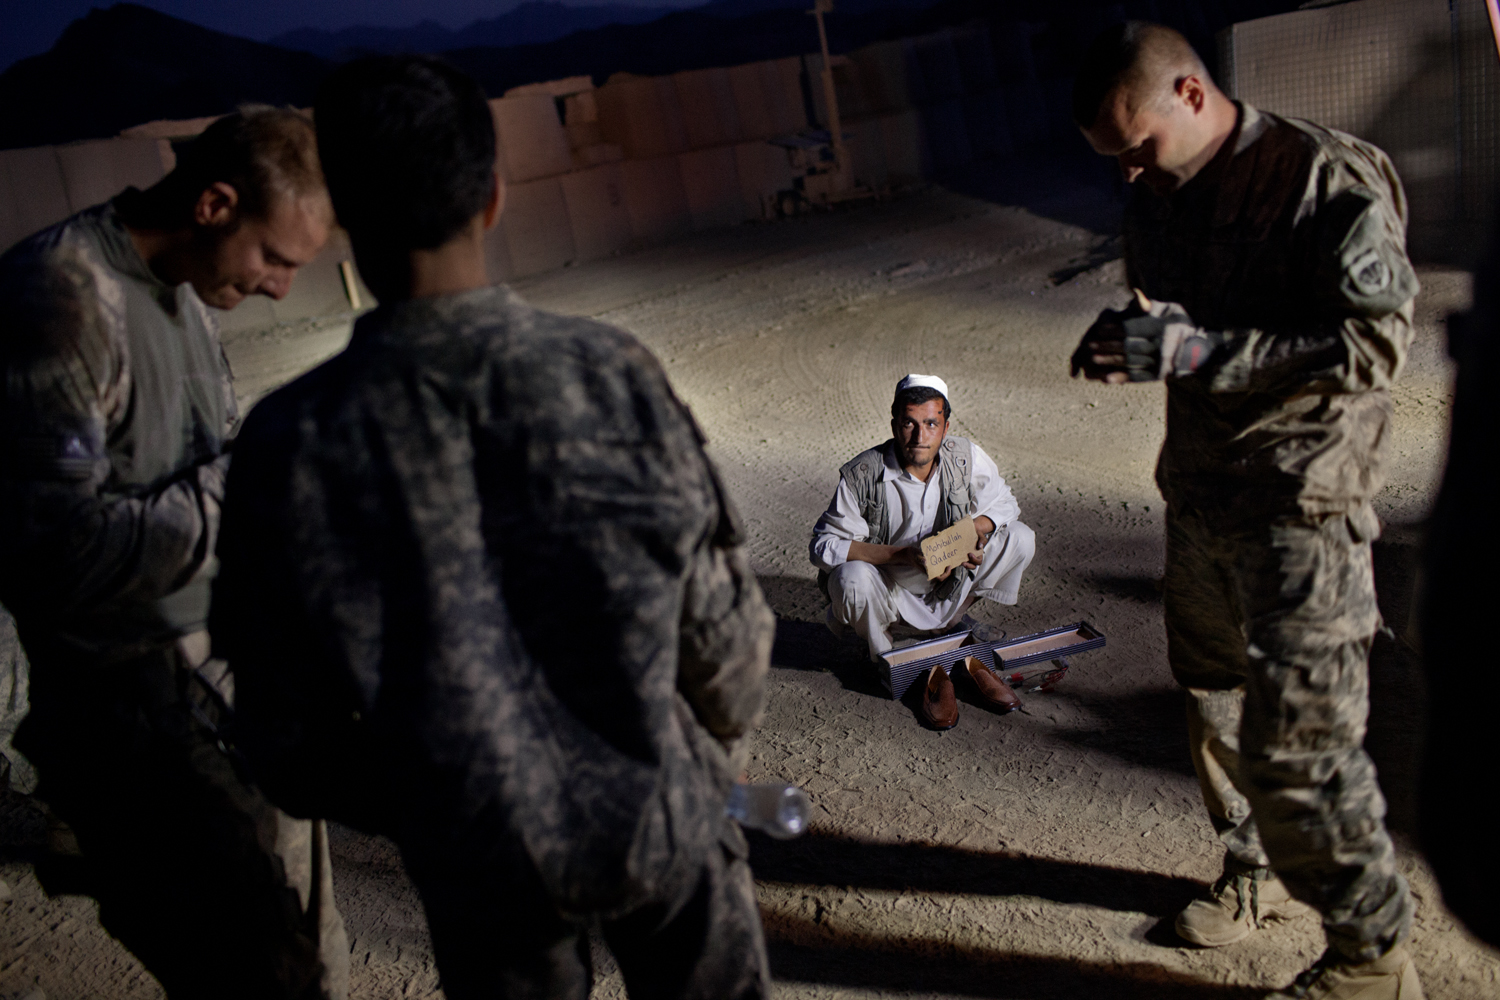  An Afghan man is detained by U.S. Army at Combat Operations Post Tangi, Wardak Province, Afghanistan.    